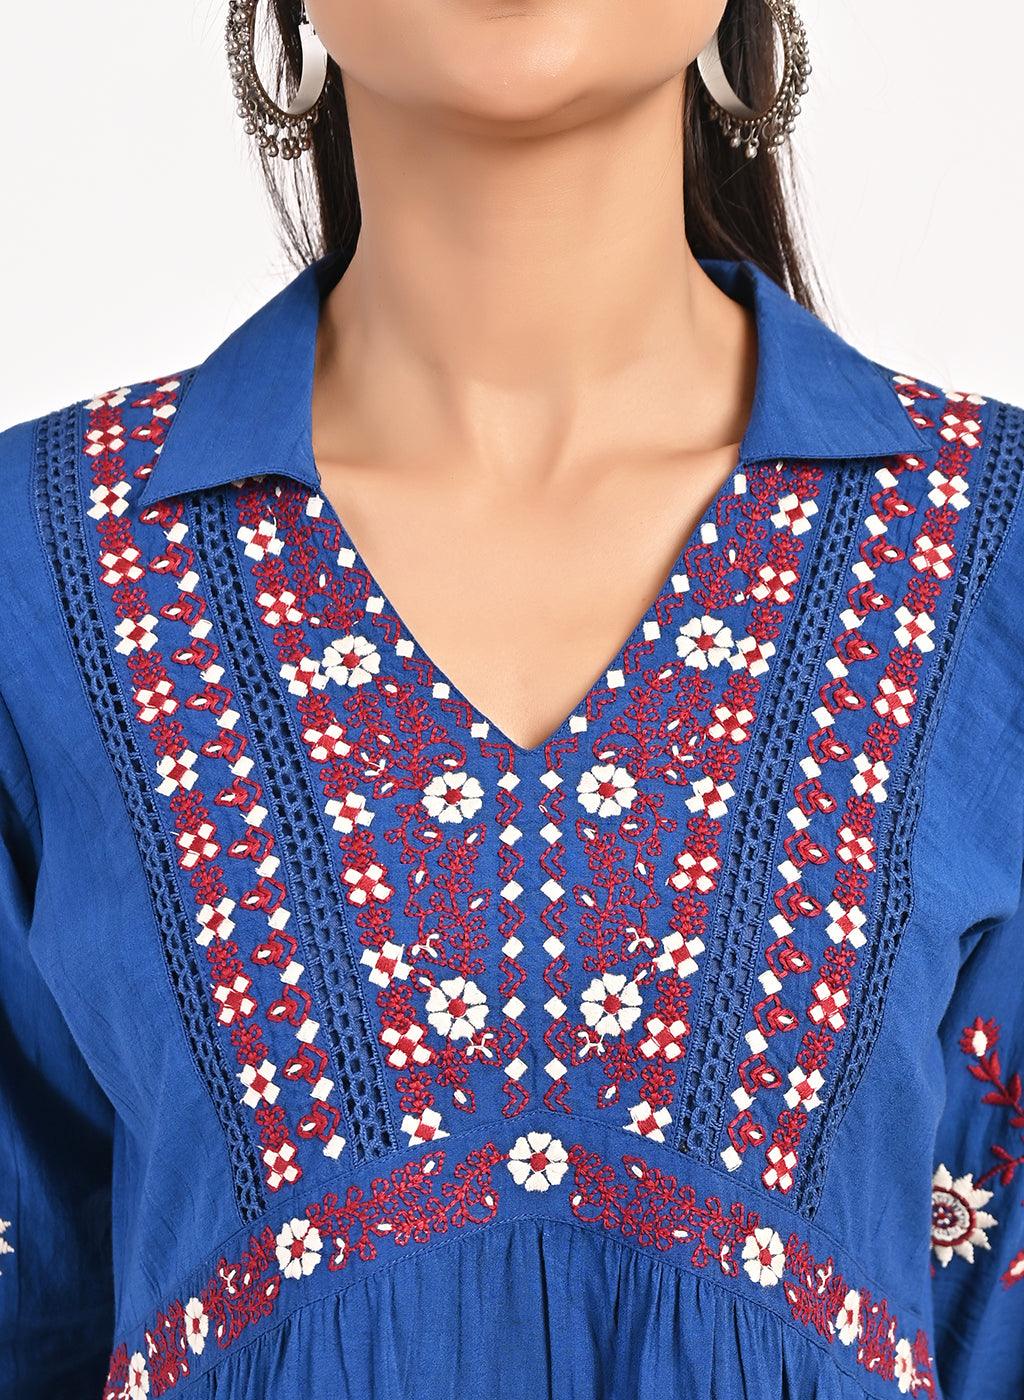 Blue Thigh-length Boho Top with Collar and Full Sleeves - Lakshita